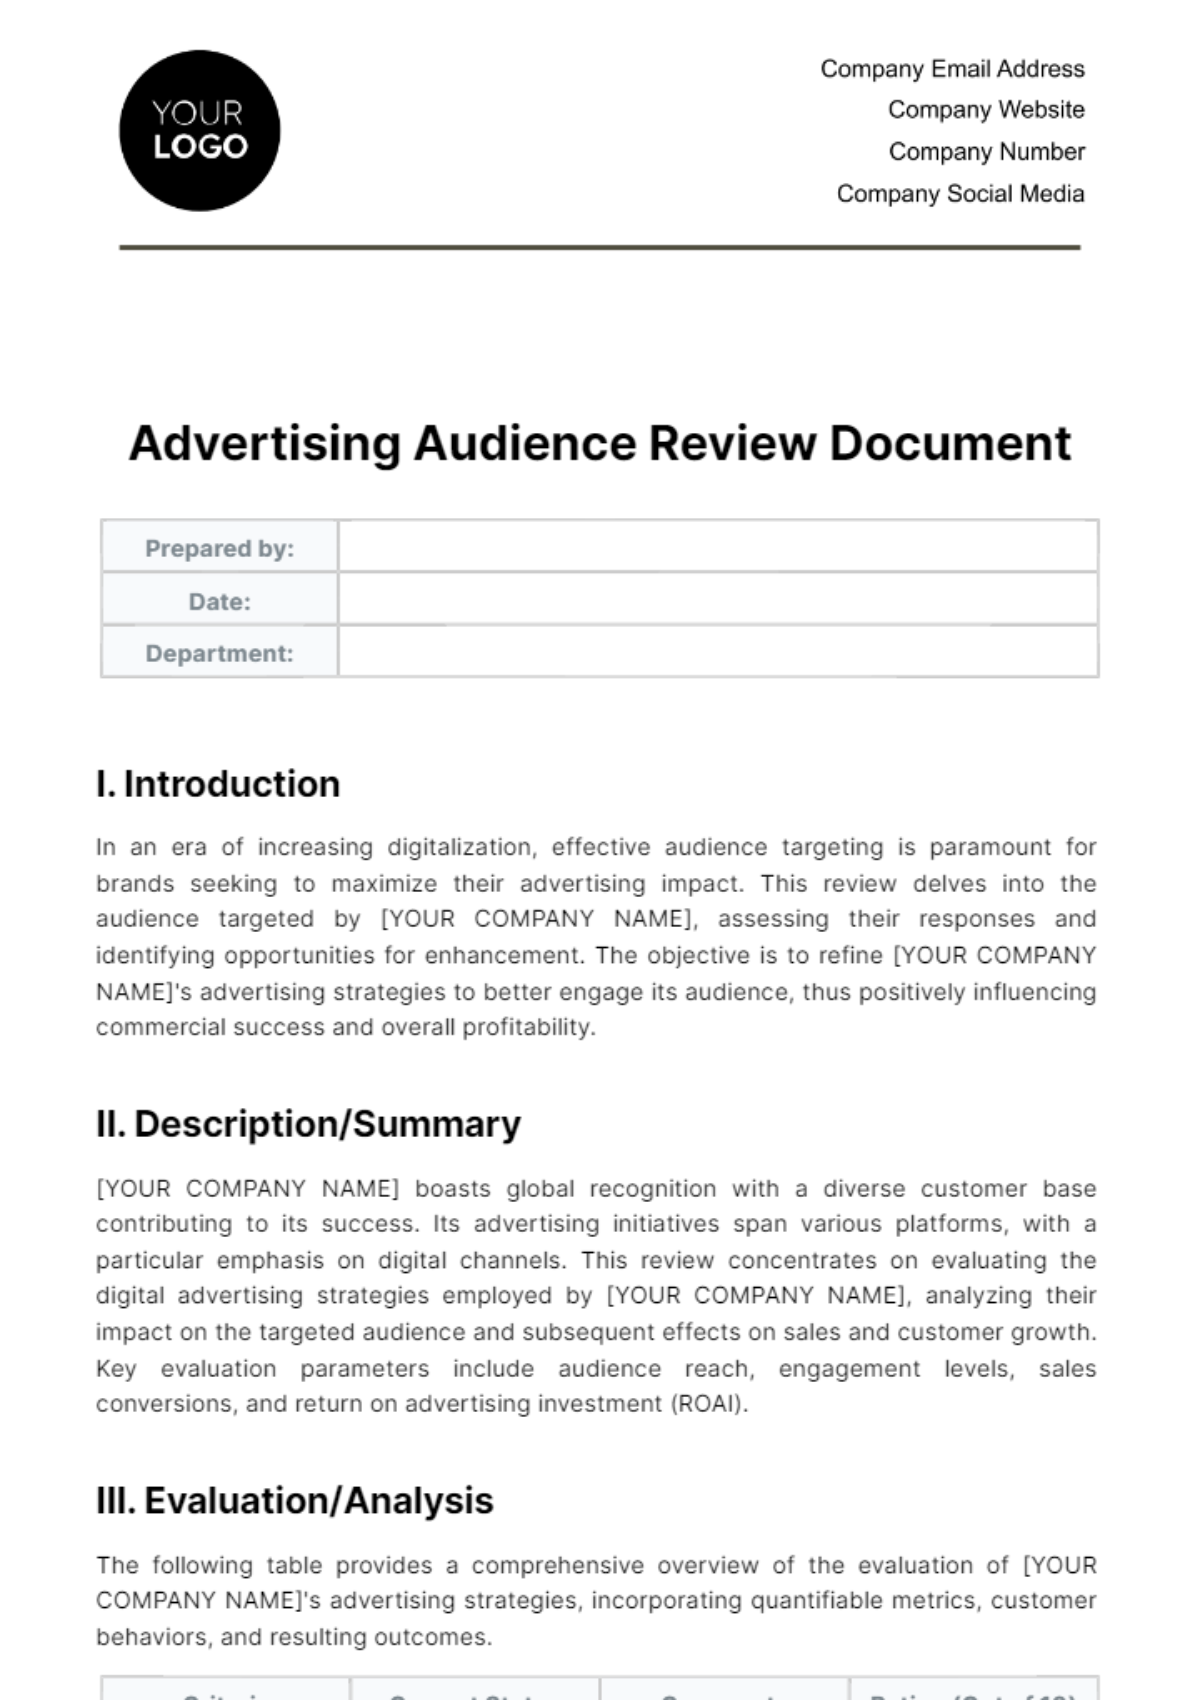 Advertising Audience Review Document Template